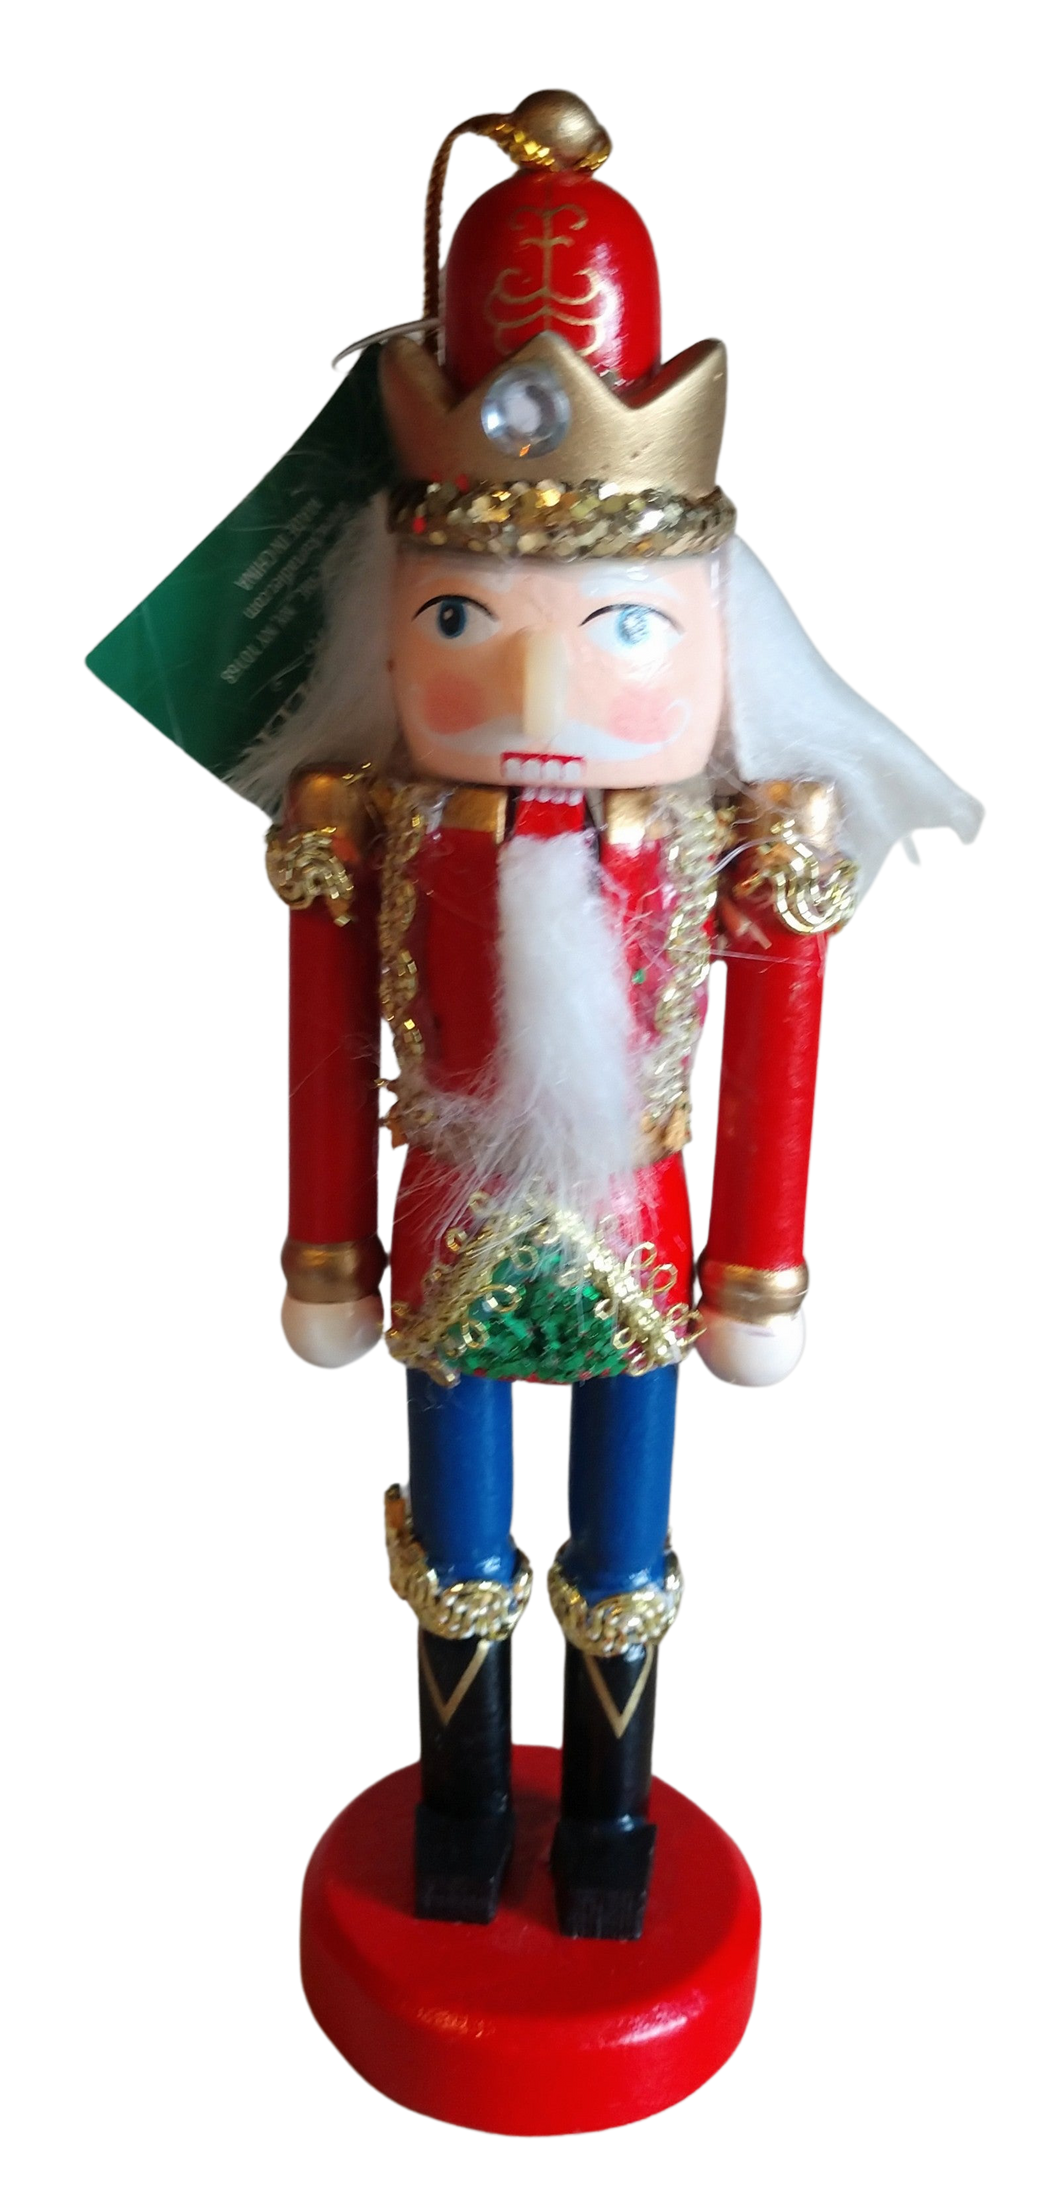 Wooden Red/Blue/Gold Nutcracker Ornament with Red/Gold Hat 6